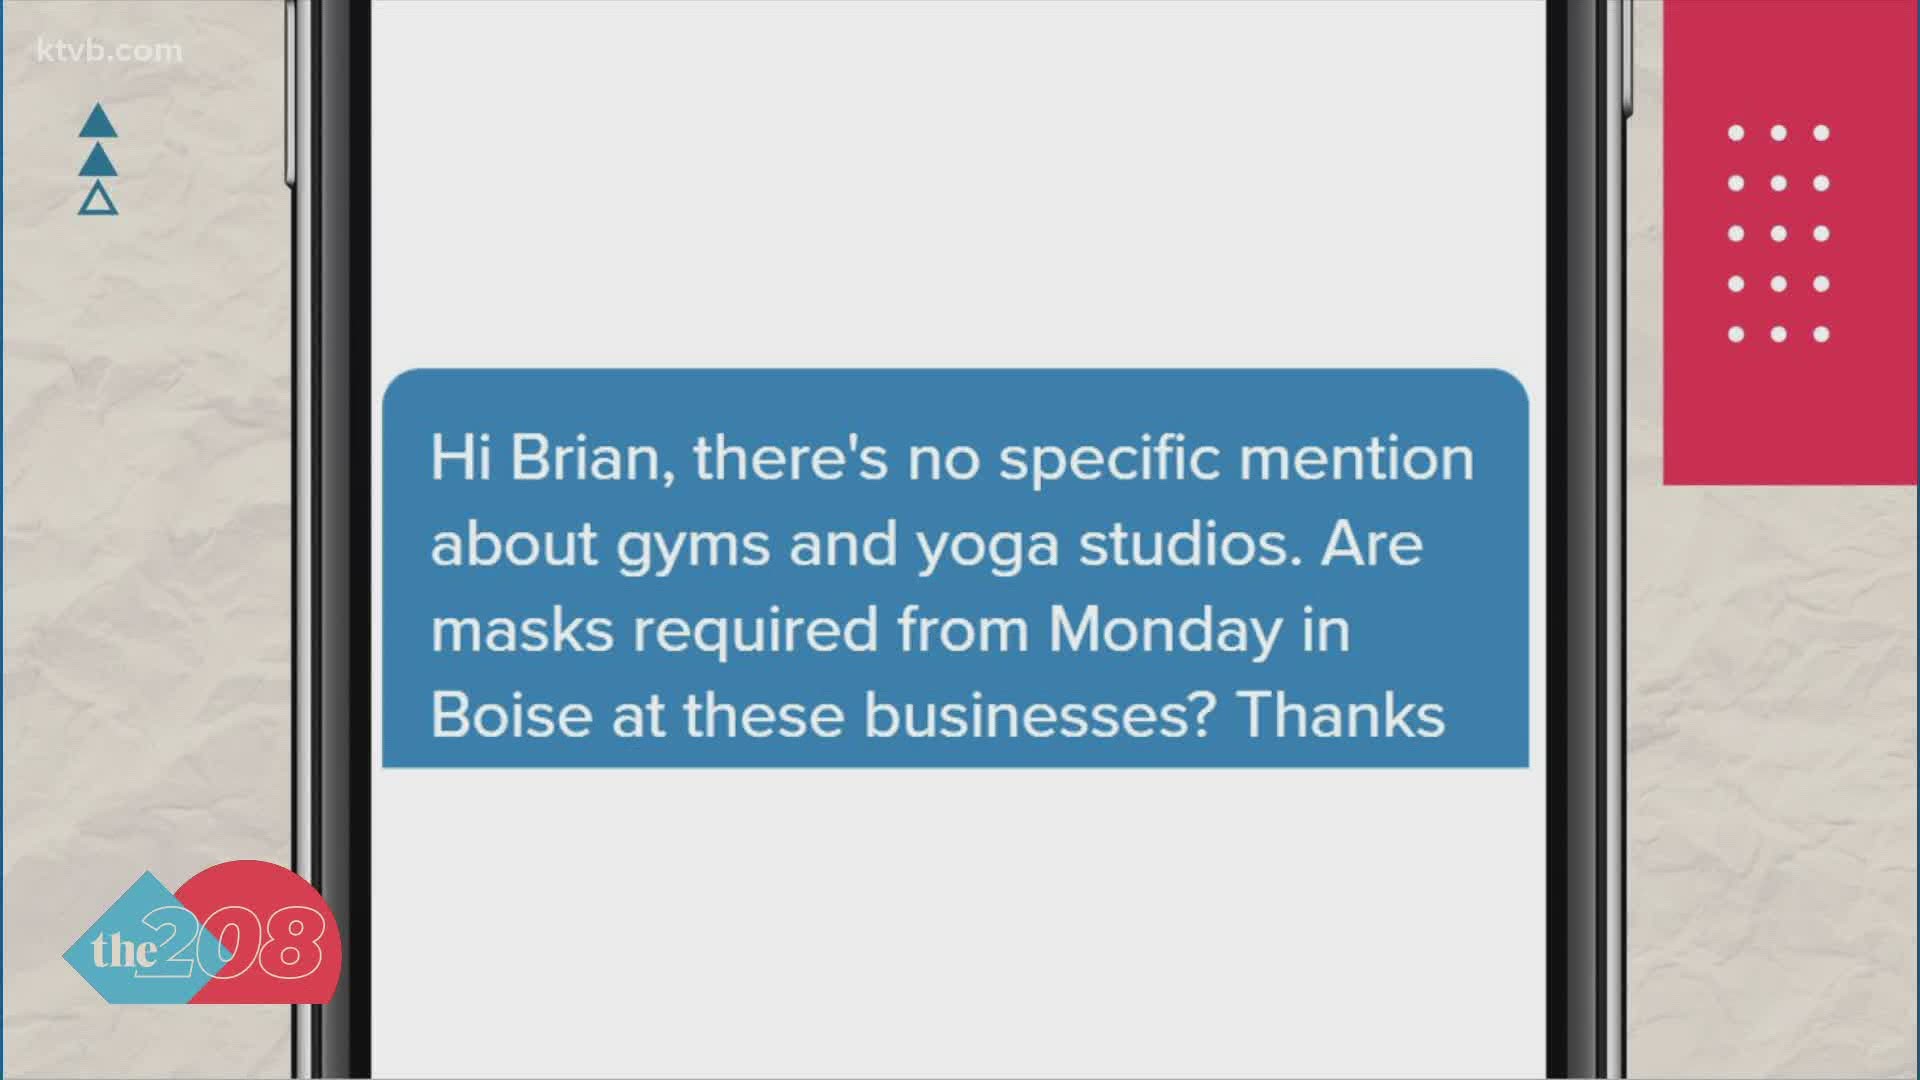 A viewer wrote to us wanting to know if their are any mask mandates when it comes to working at the gym in Boise.